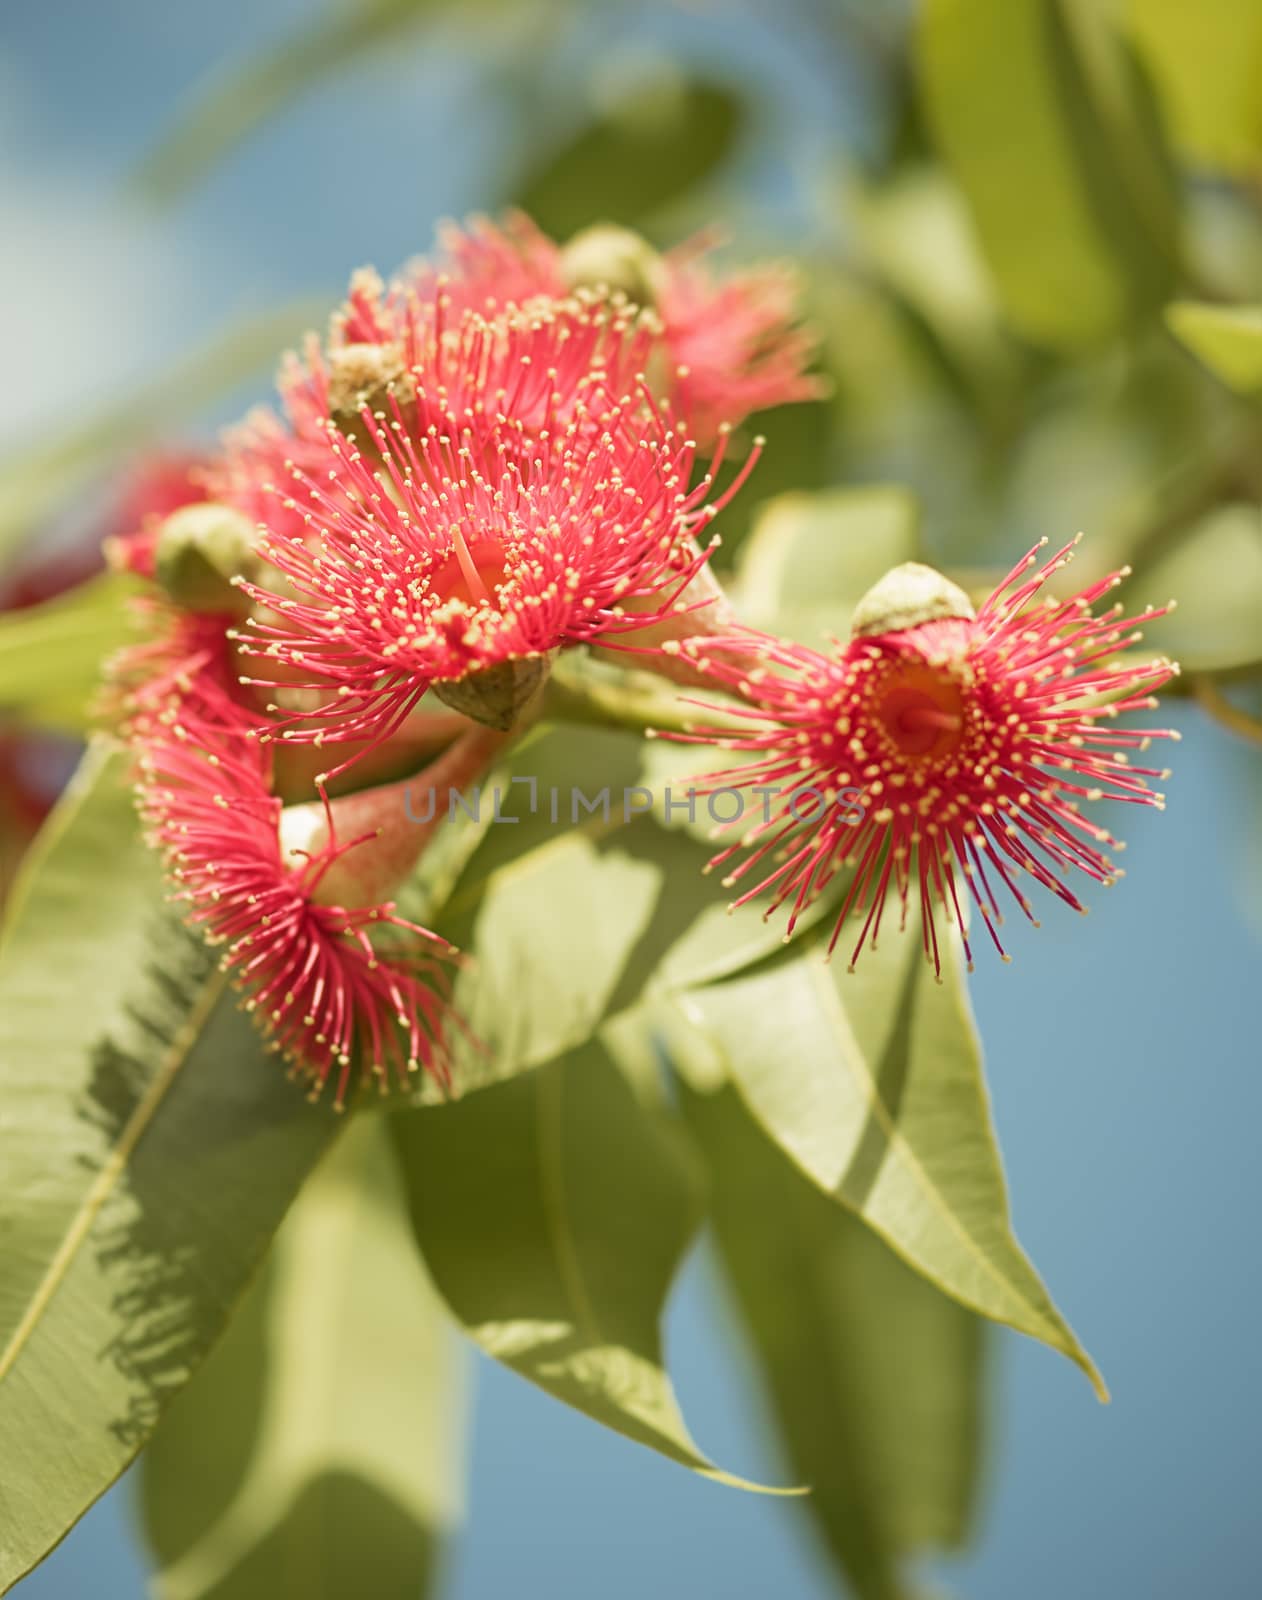 Australian native flowering gum tree with red flowers and green foliage against blue sky